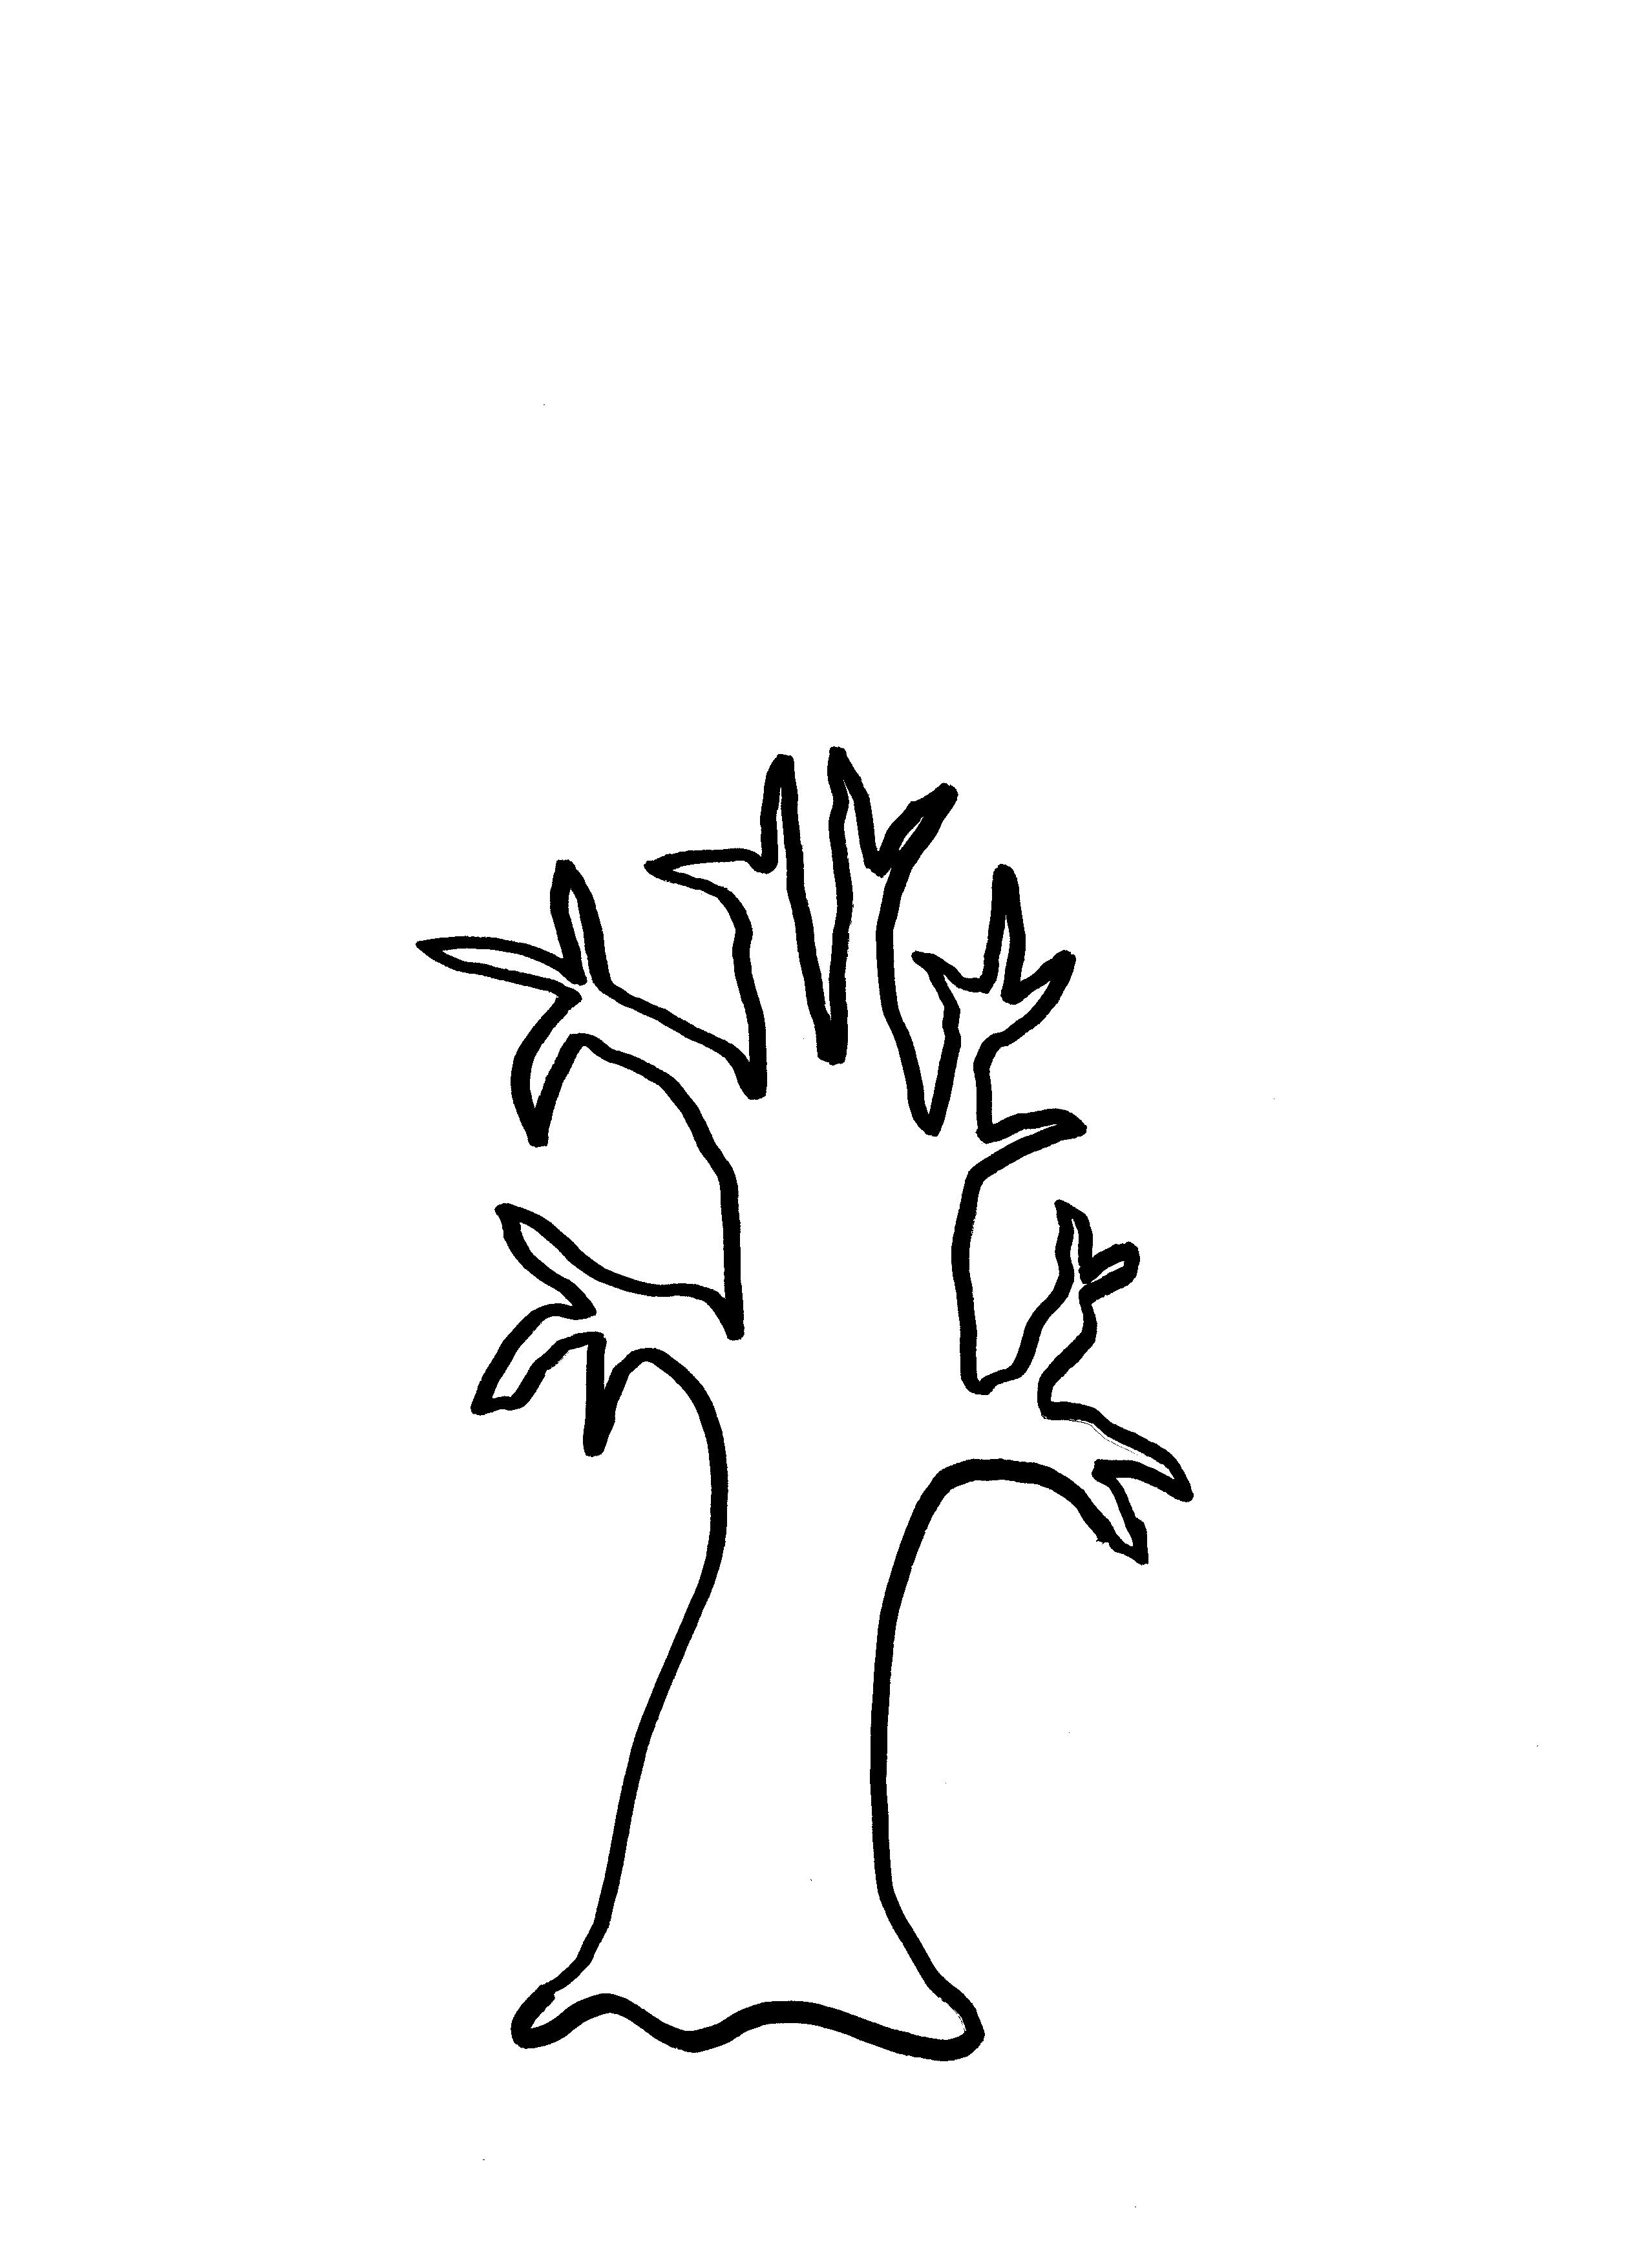 Fall tree clipart black and white with 6 branches